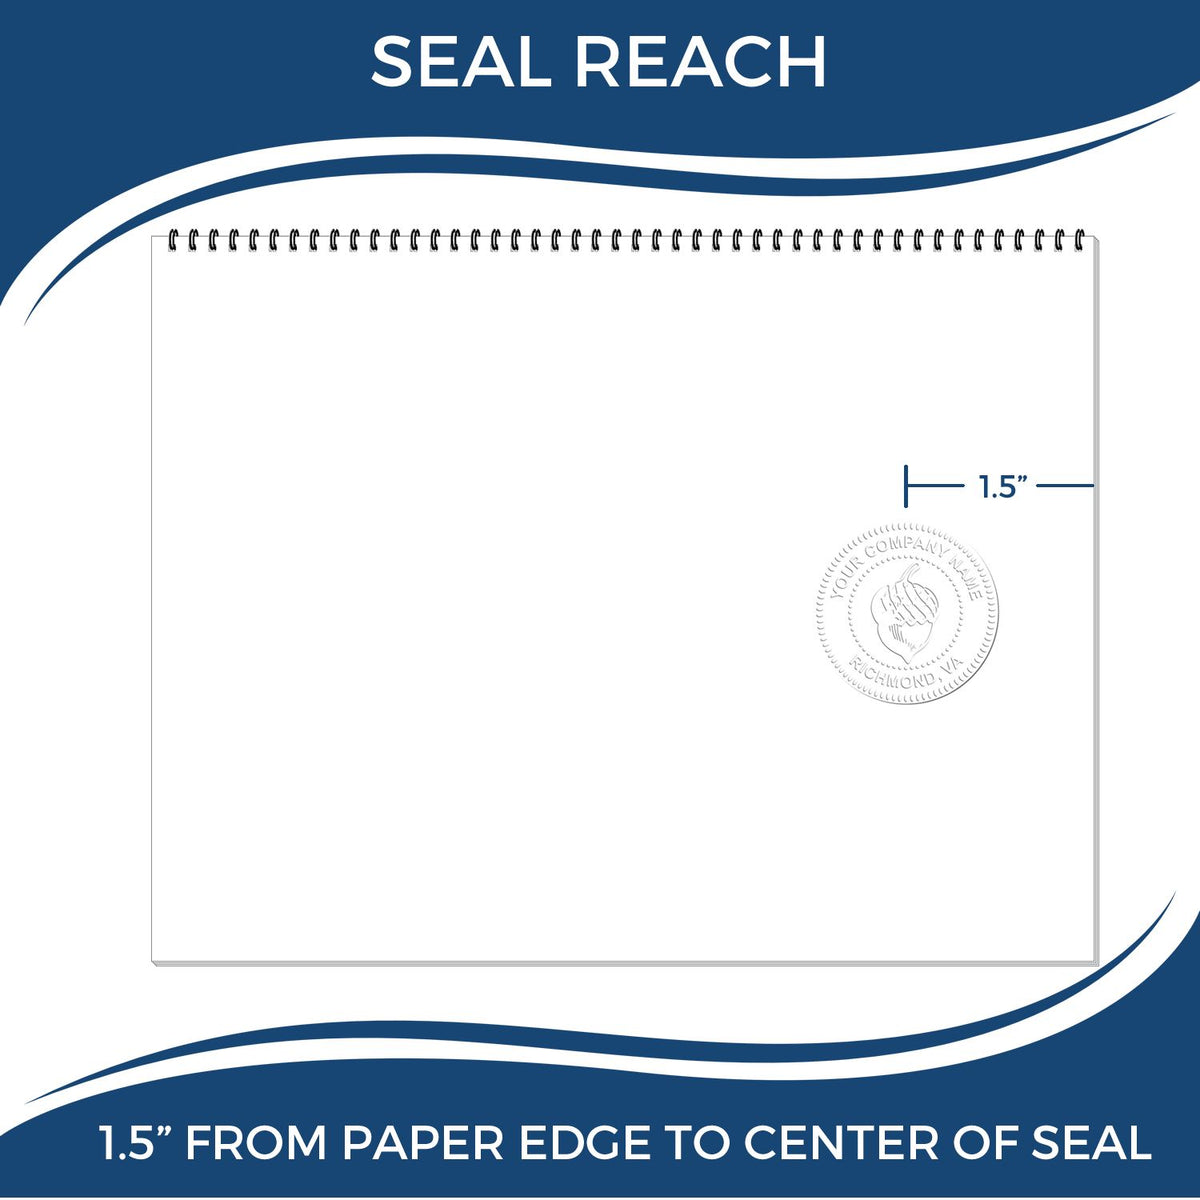 An infographic showing the seal reach which is represented by a ruler and a miniature seal image of the State of Georgia Architectural Seal Embosser